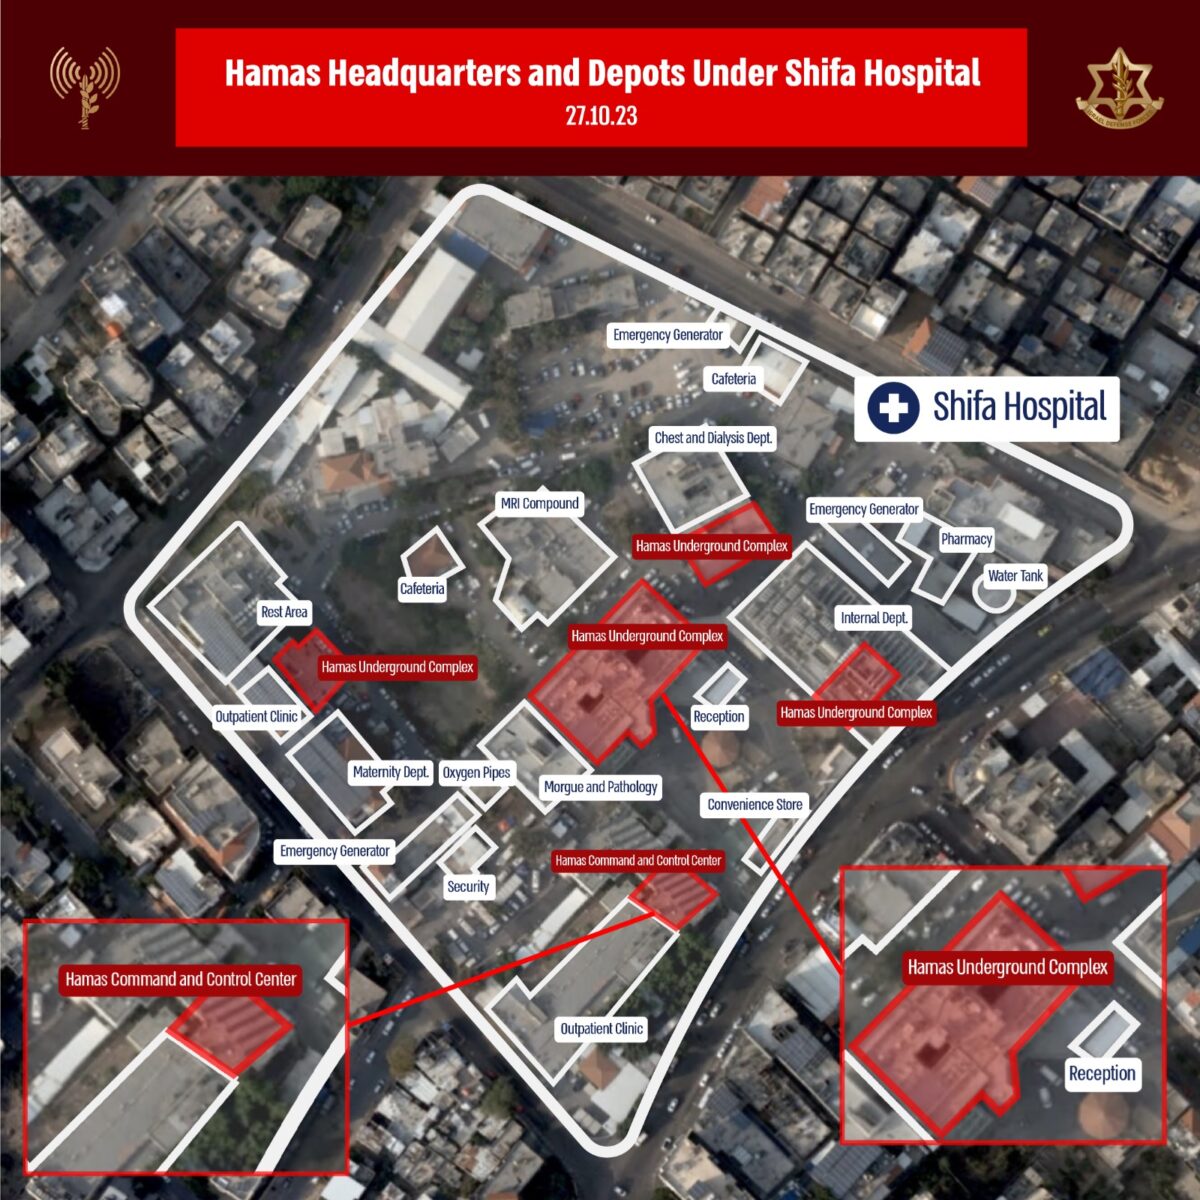 Images released by Israel show what Hamas command centers would look like in the hospital area, both underground and on the surface. (Photo: Israeli Defense Forces)